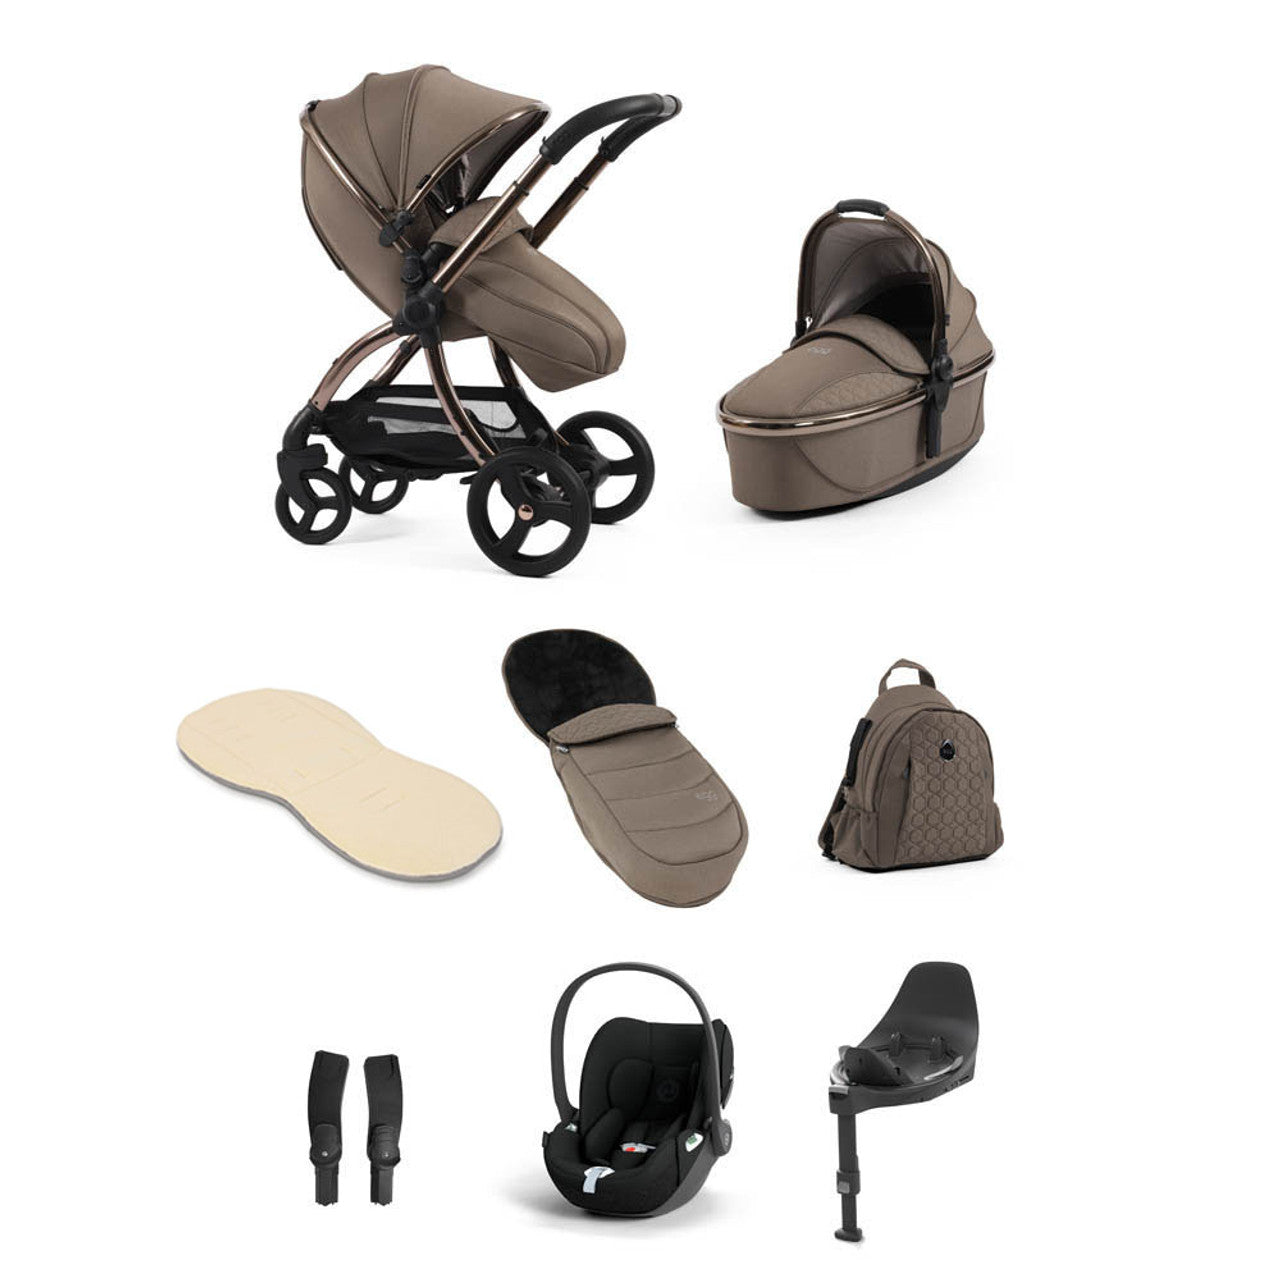 Egg® 3 Luxury Cloud T i-Size Travel System Bundle - Mink -  | For Your Little One